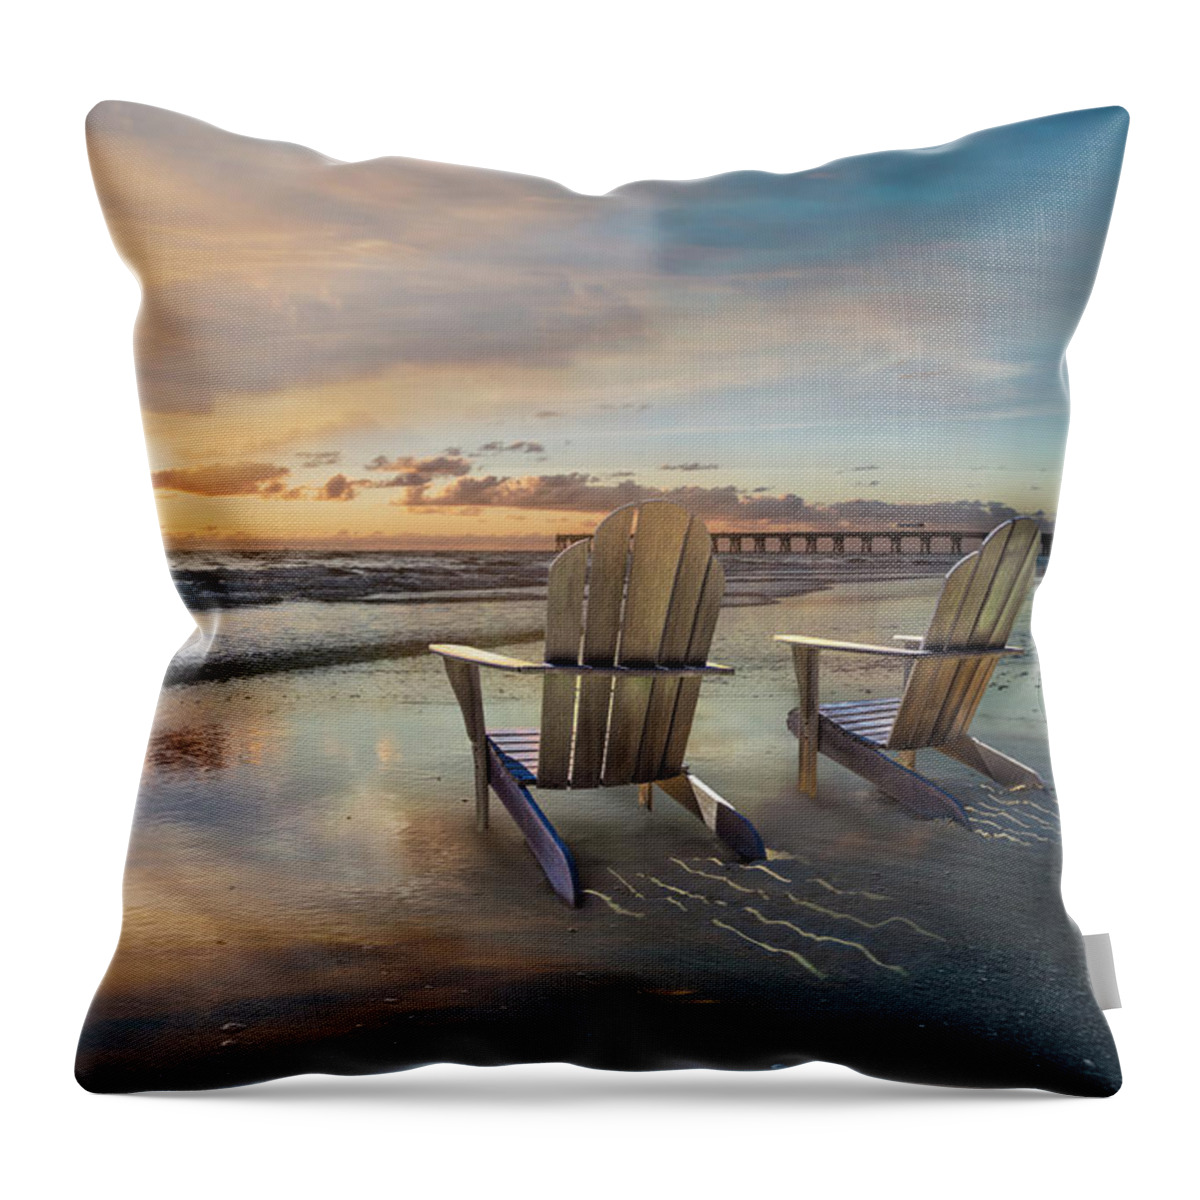 Boats Throw Pillow featuring the photograph Sunrise Romance by Debra and Dave Vanderlaan